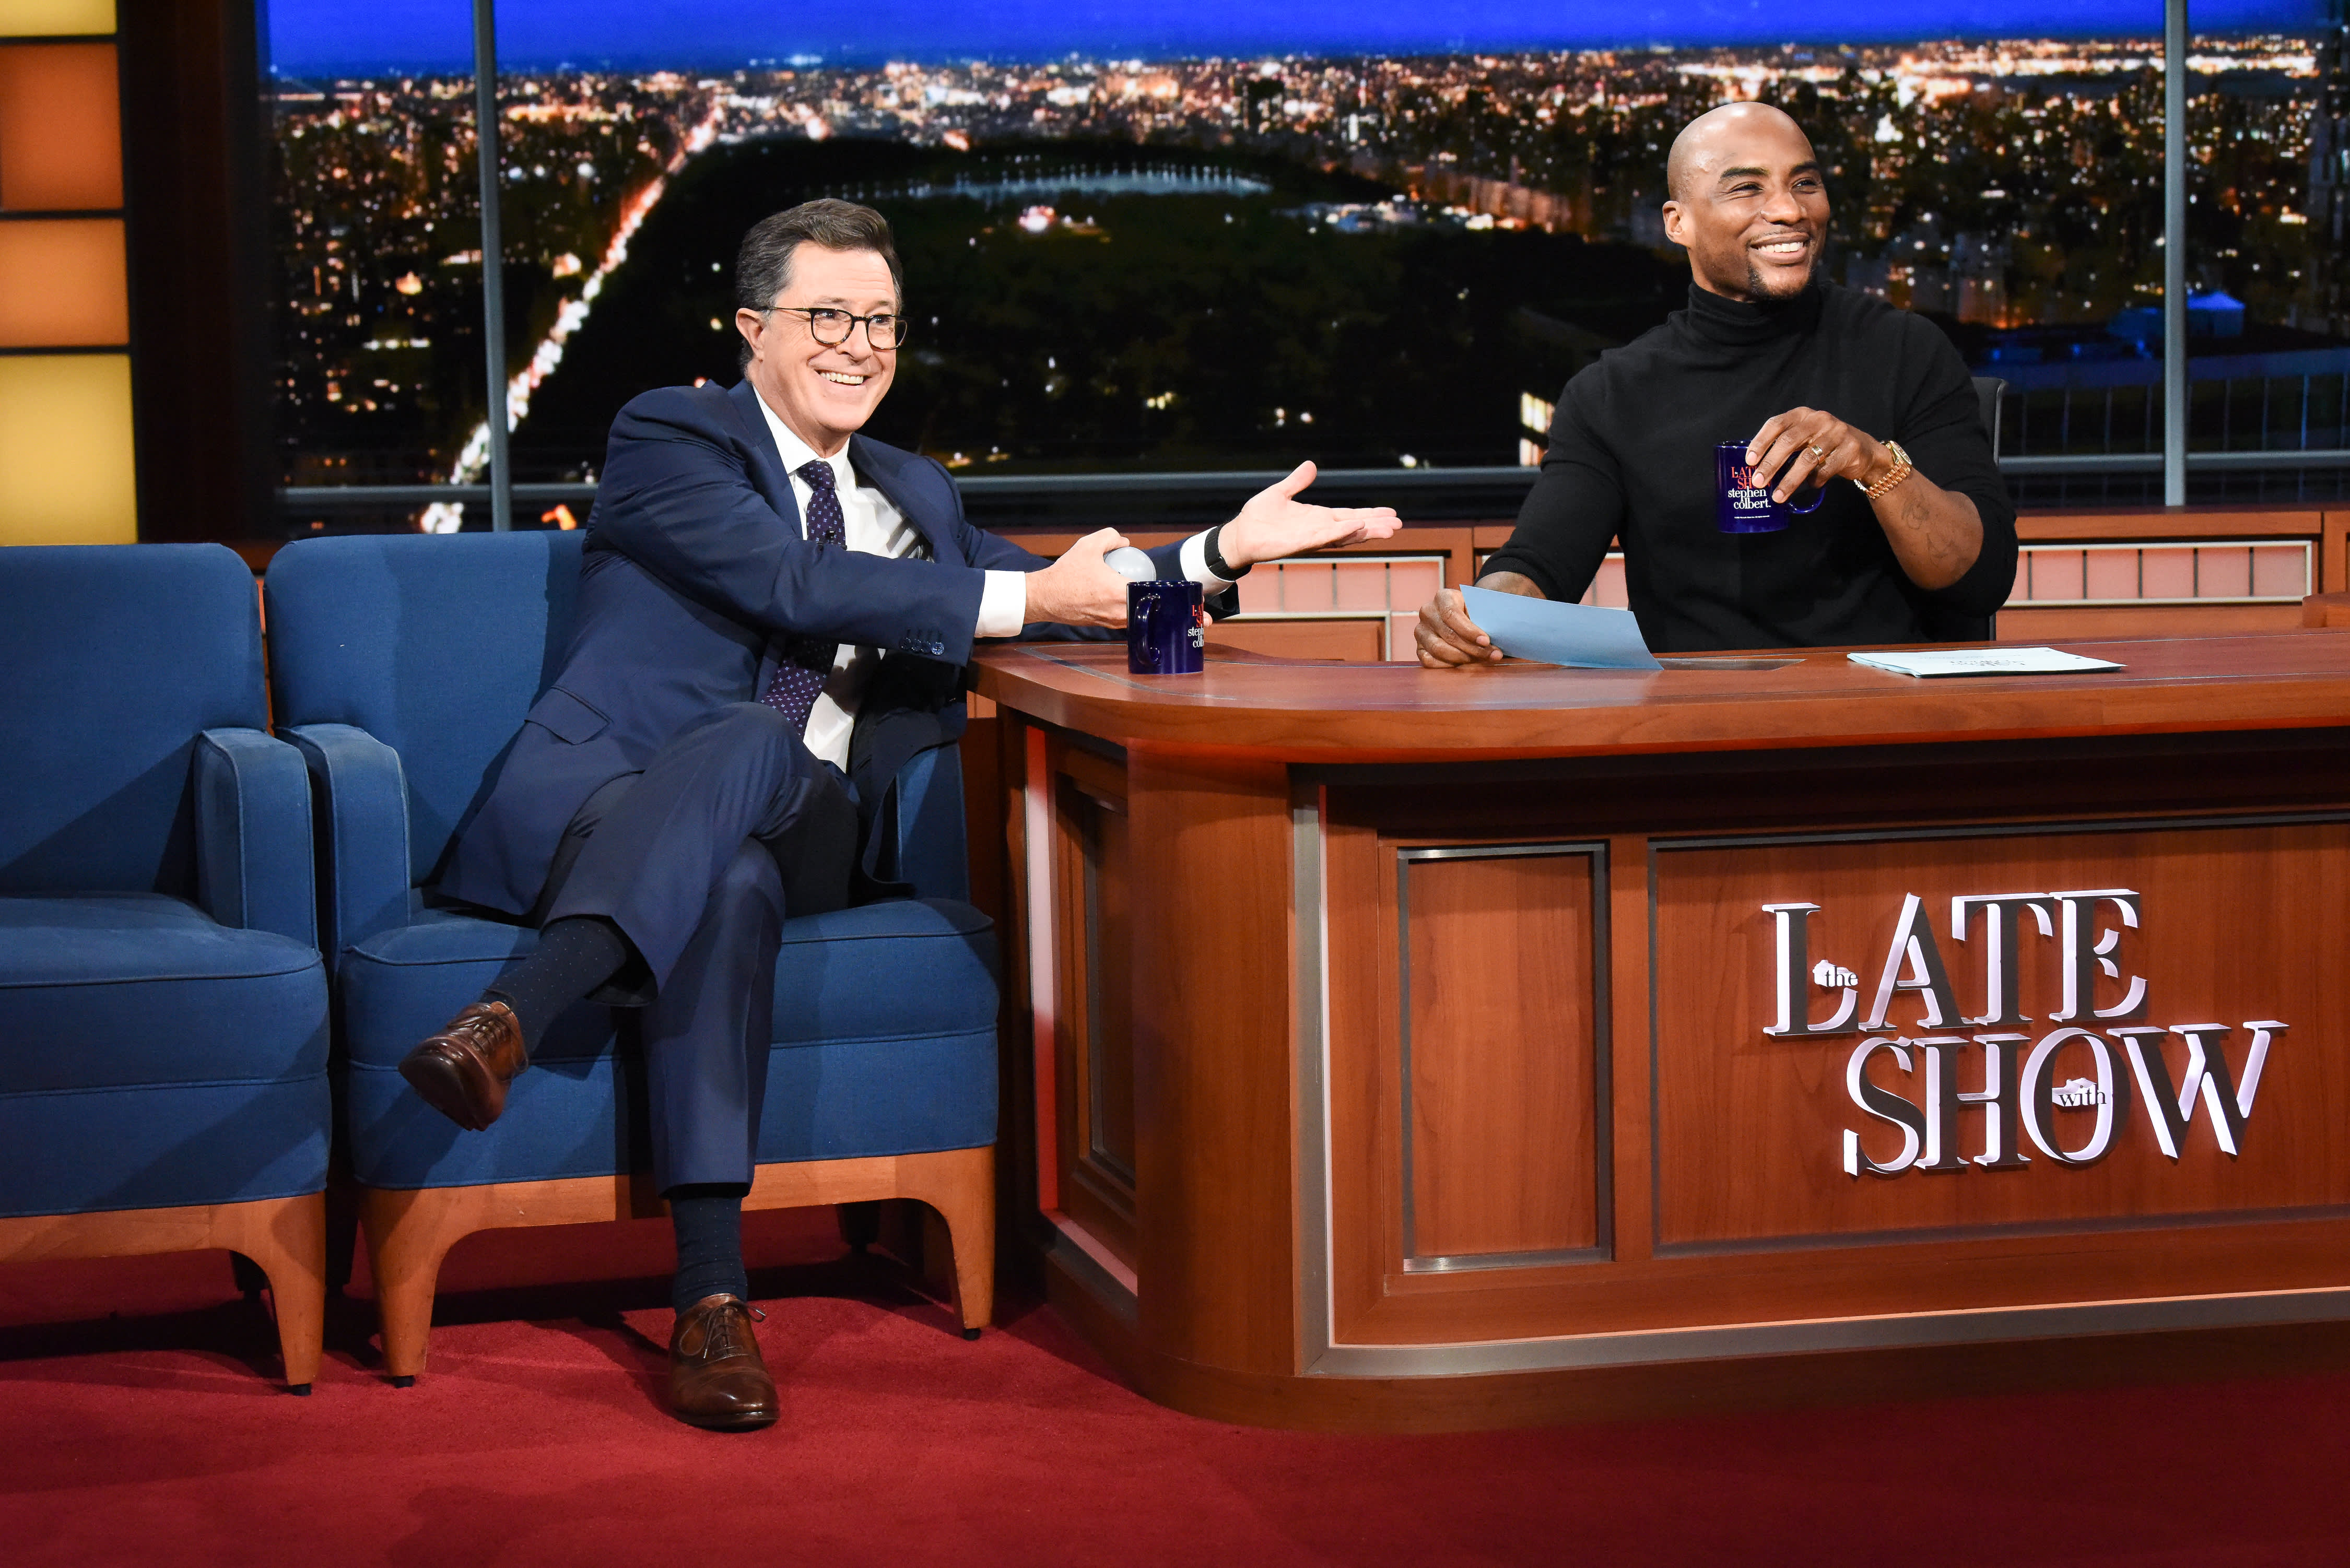 Charlamagne Tha God and Stephen Colbert to launch late night TV talk show on Comedy Central